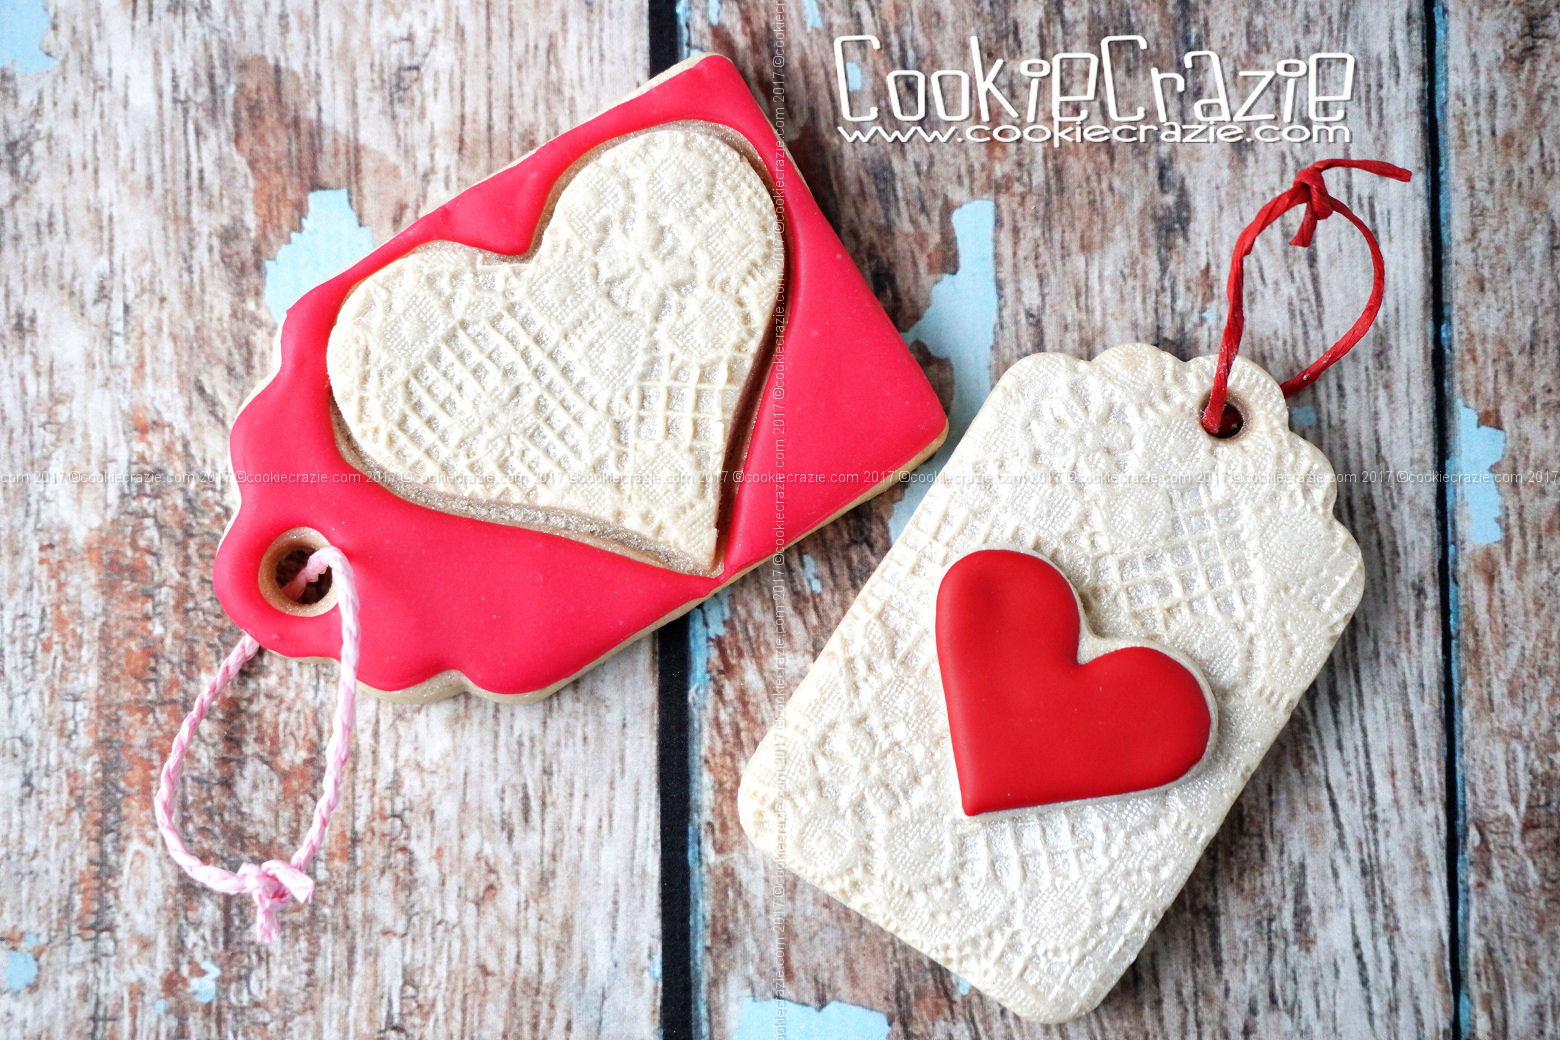  Lacy Valentine Heart Gift Tag Decorated Sugar Cookies YouTube video  HERE  